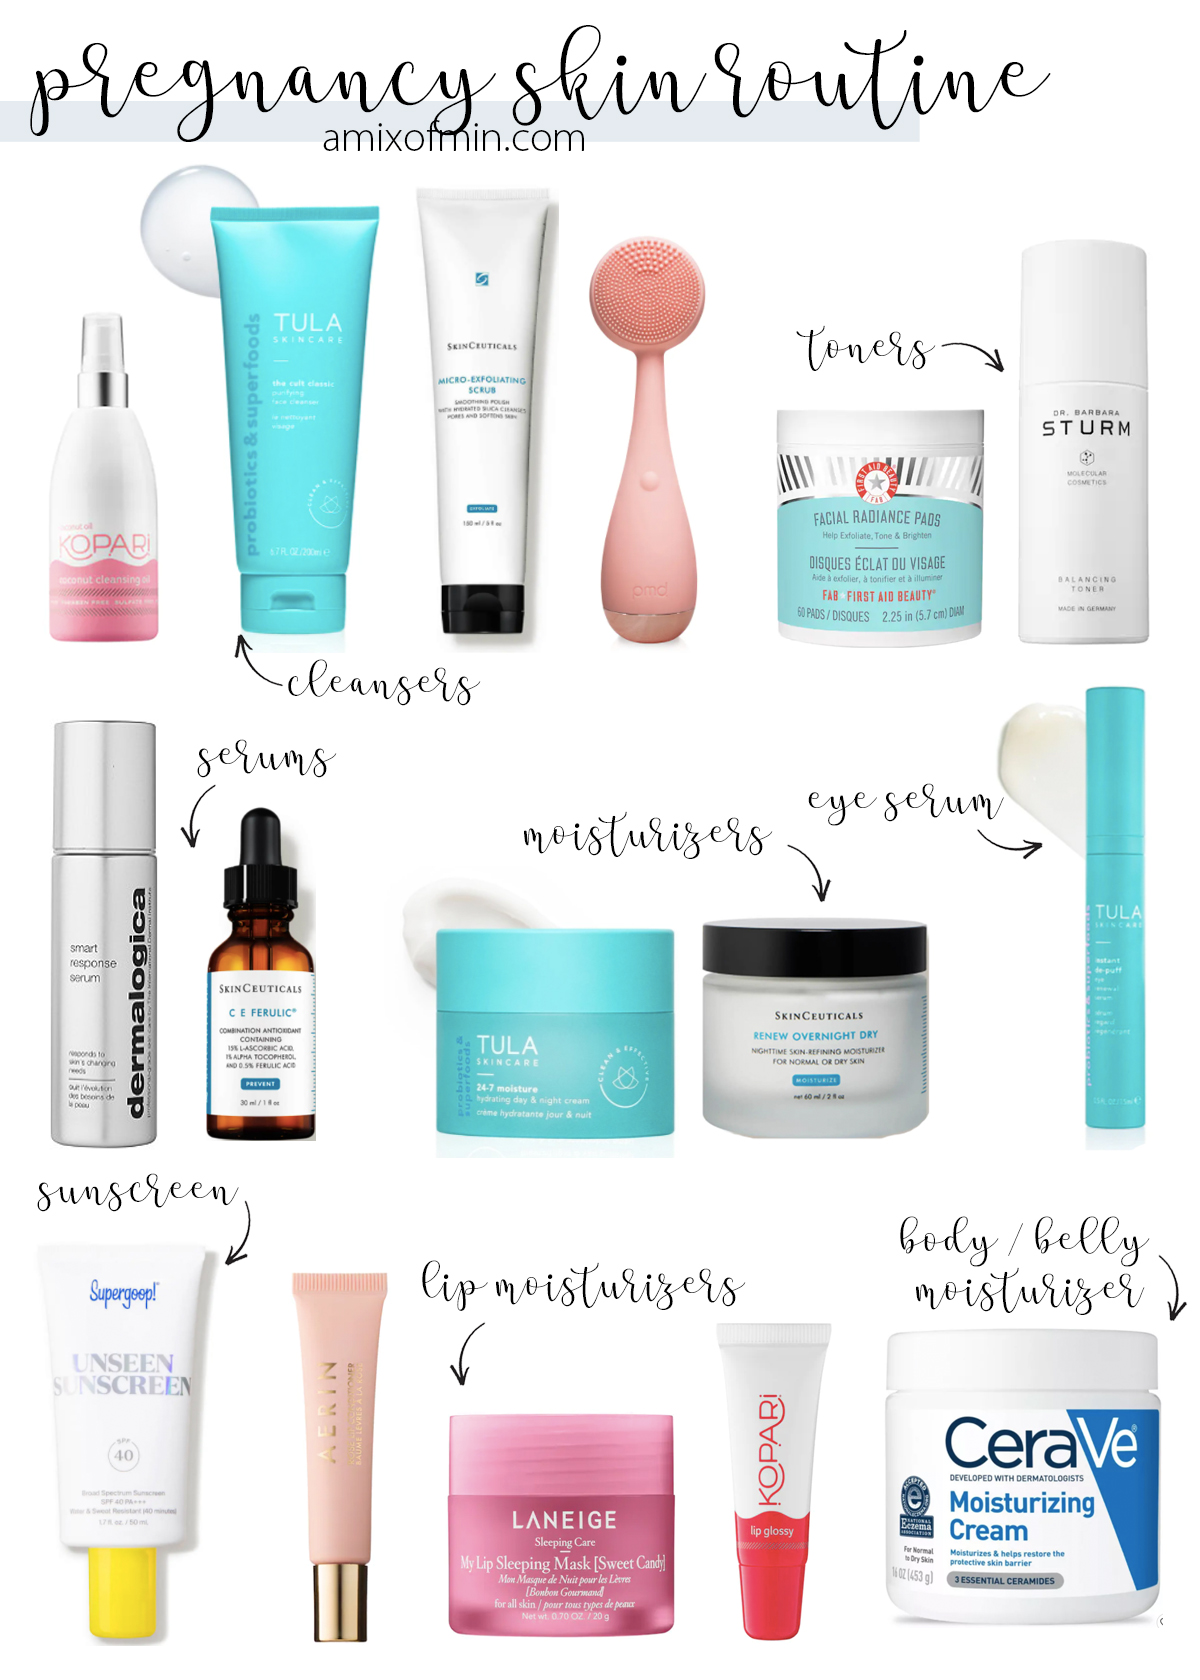 A Guide to Pregnancy-Safe Skincare: What to Avoid and What to Use – Tracie  Martyn